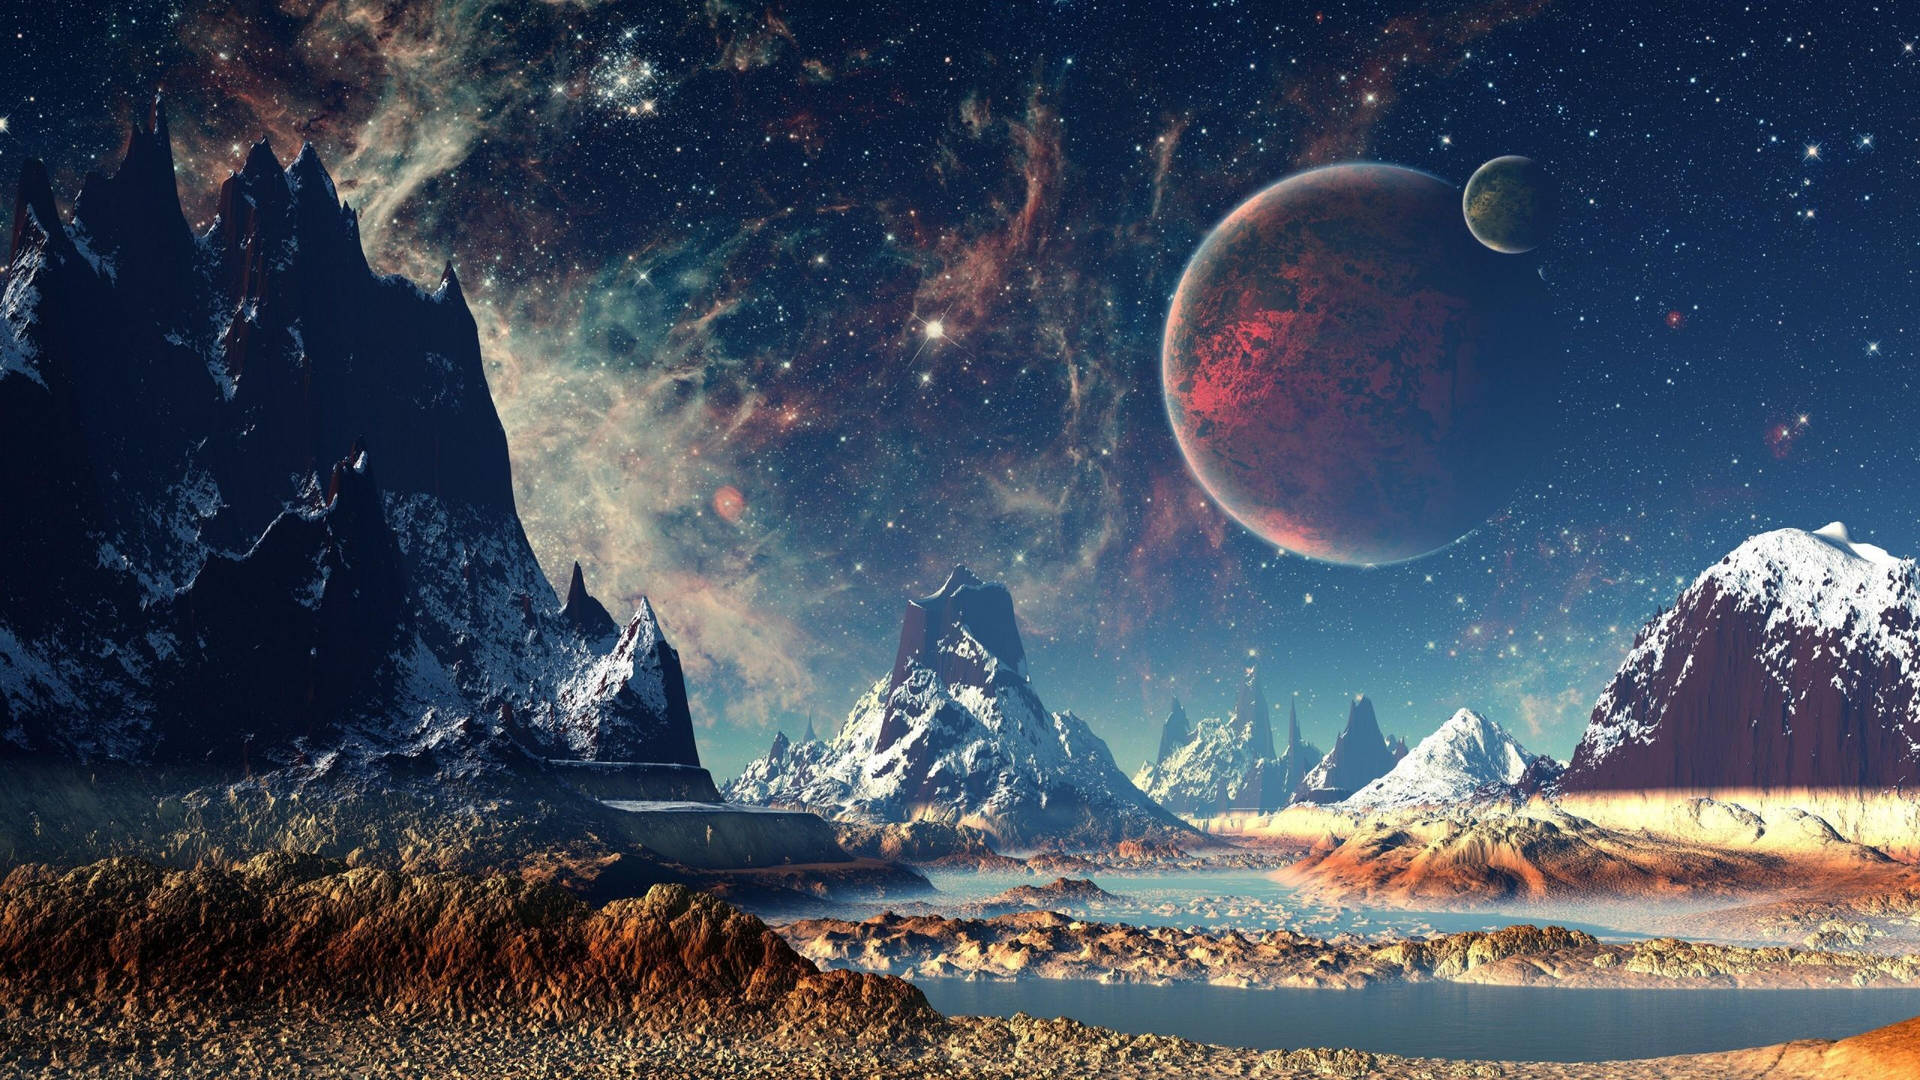 Different Planet In Space 2560x1440 Wallpaper